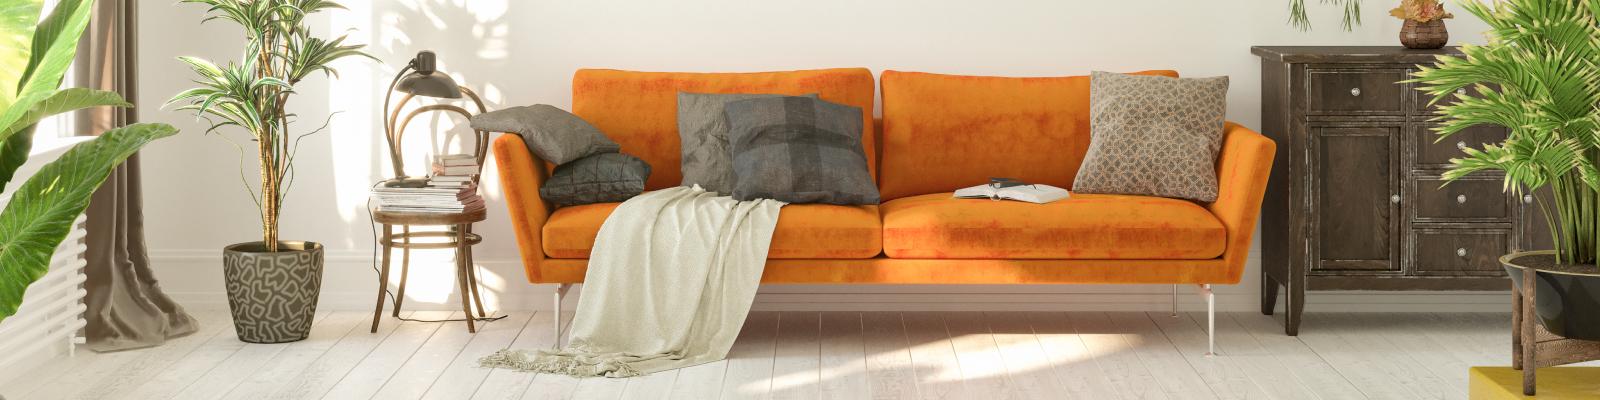 A vibrant orange couch with throw pillows and blankets sits in a living room surrounded by plants.